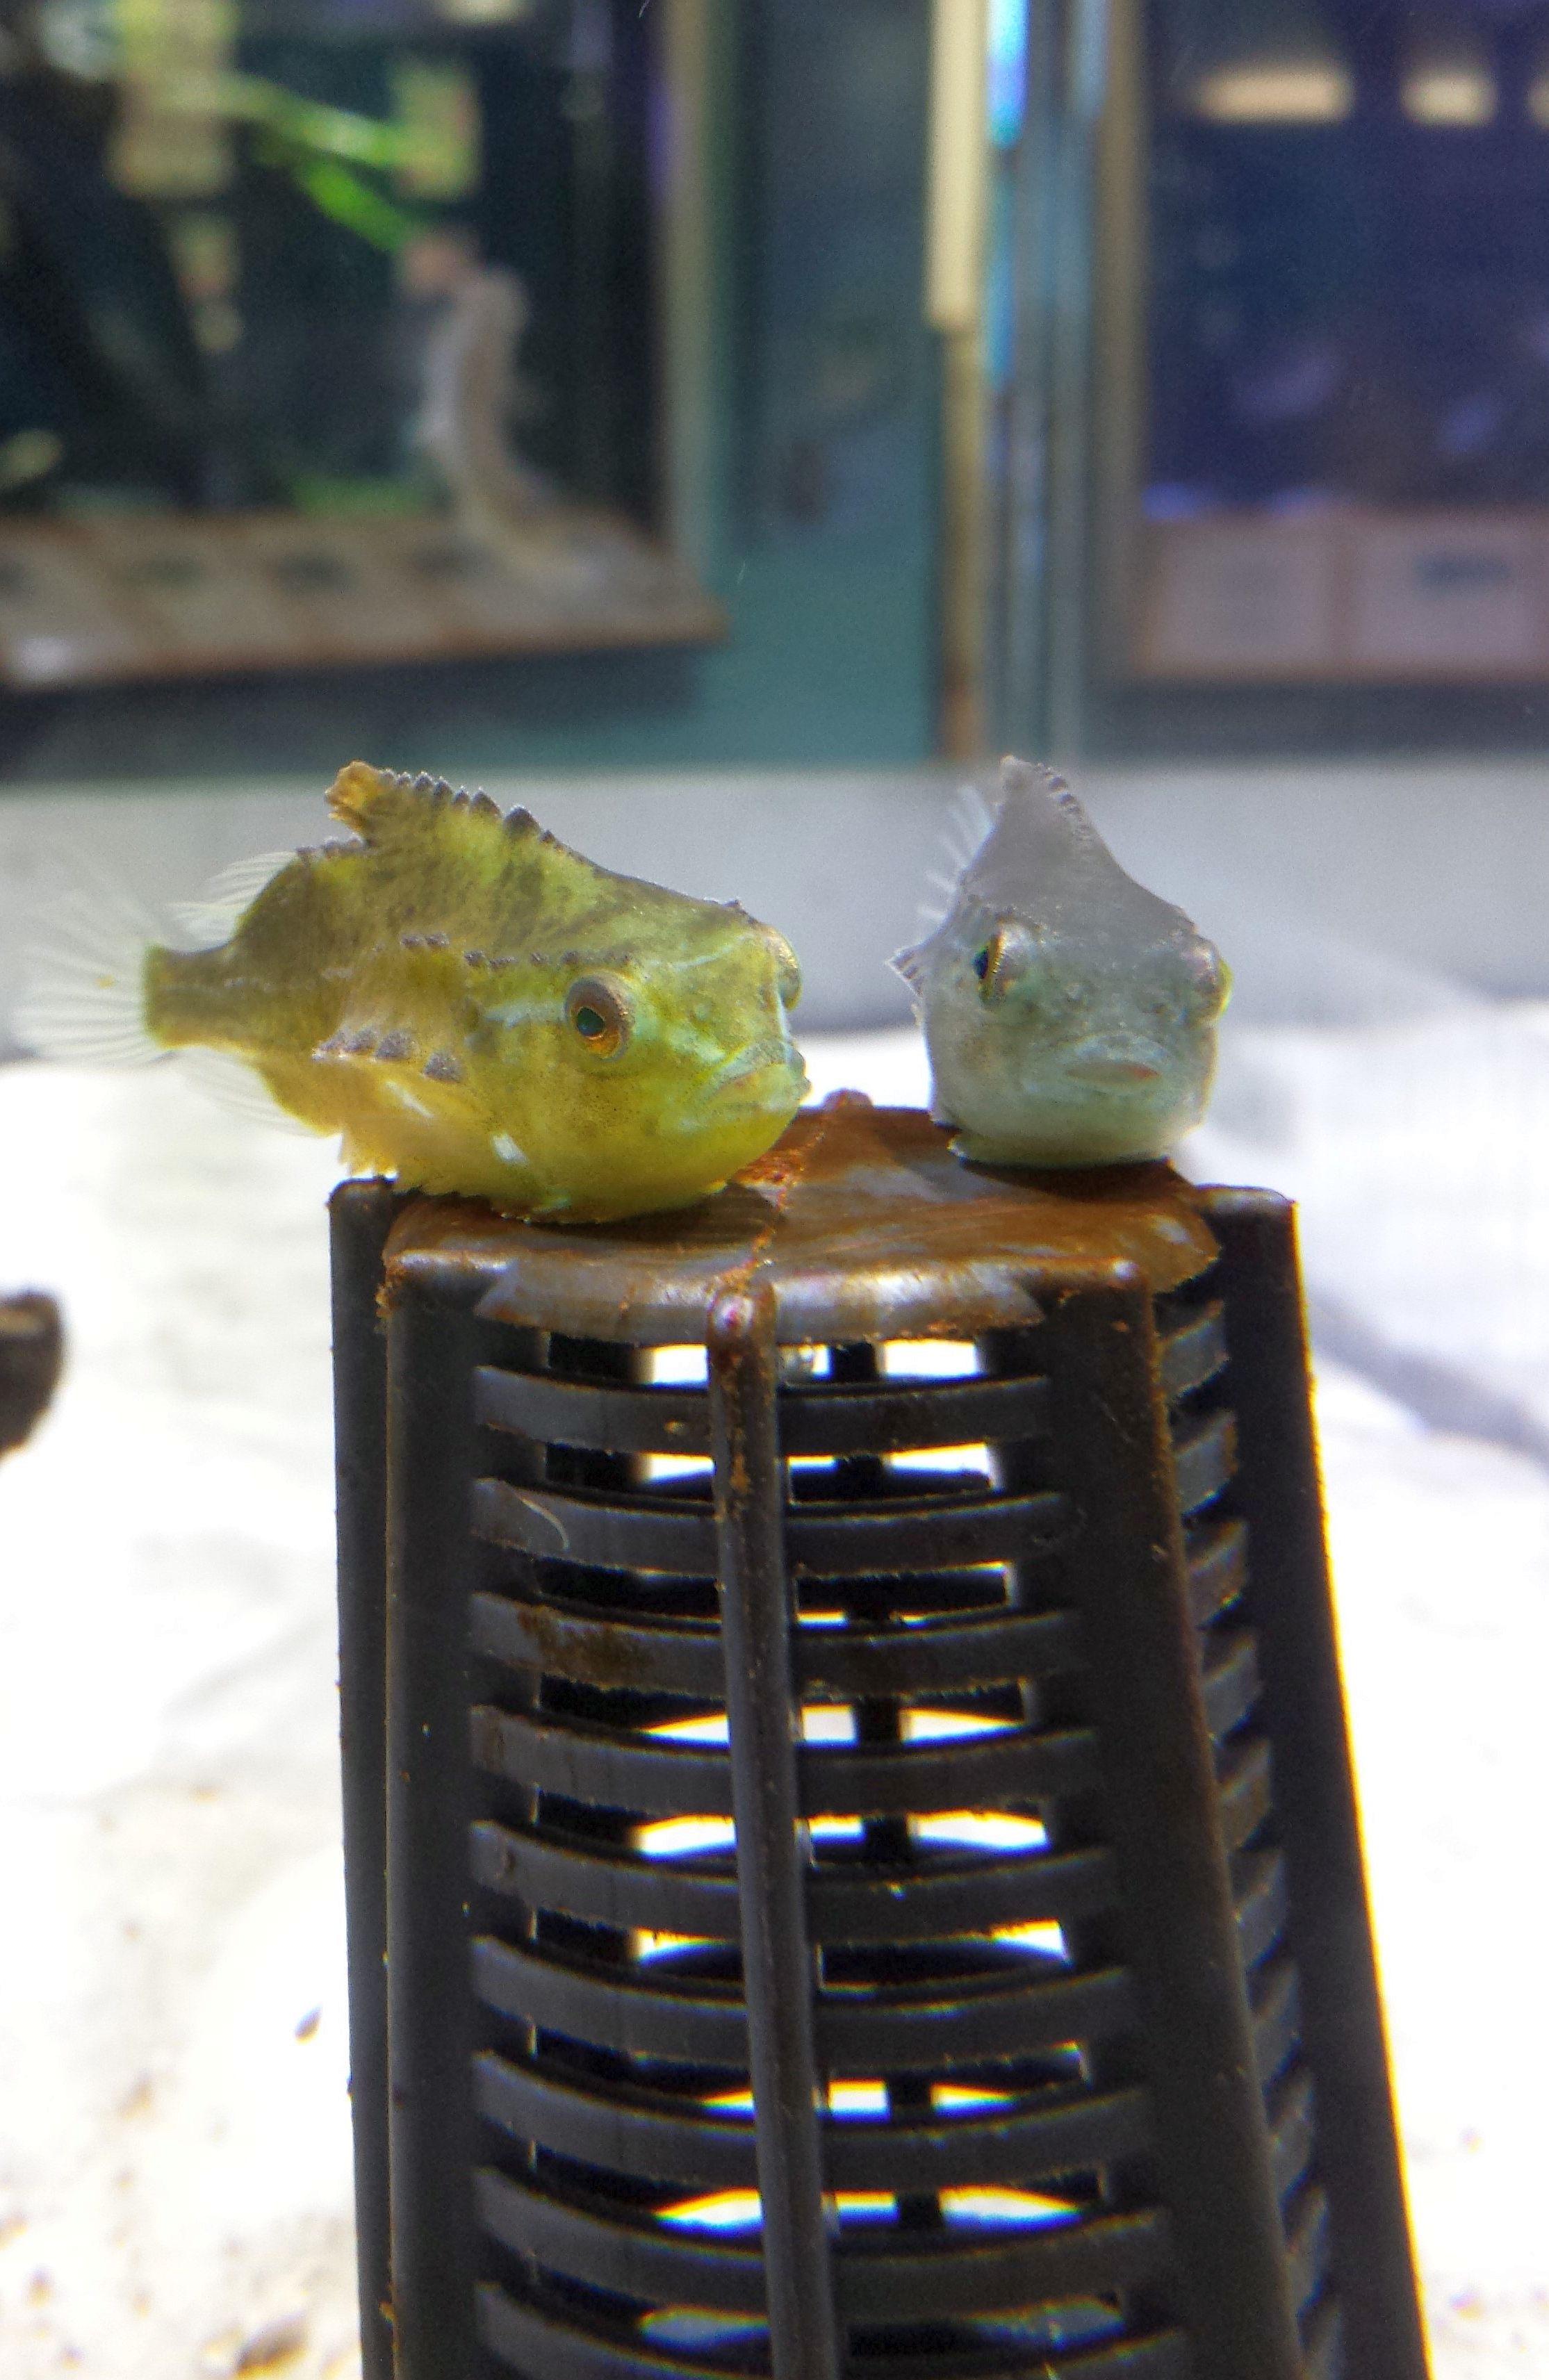 Young Lumpfish attach to structures to catch whatever planktonic food passes by.